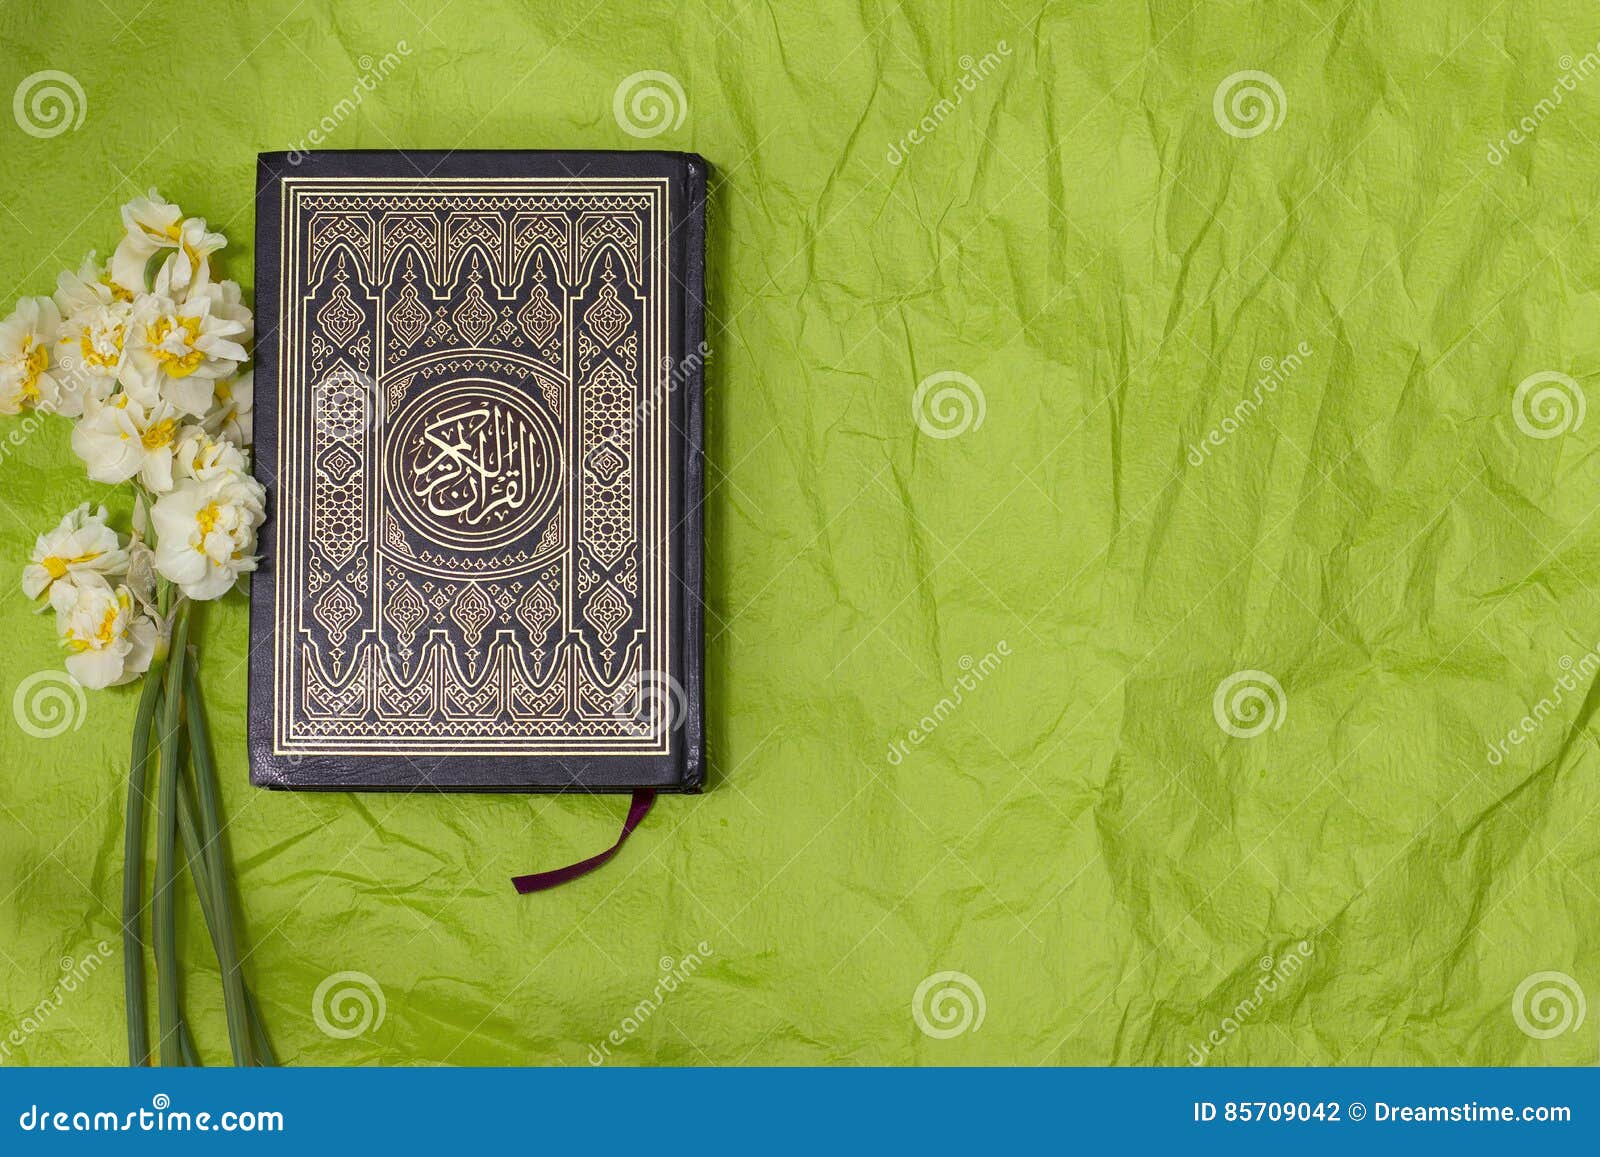 Holy Quran and Daffodils Bouquet on Green Craft Paper Background ...